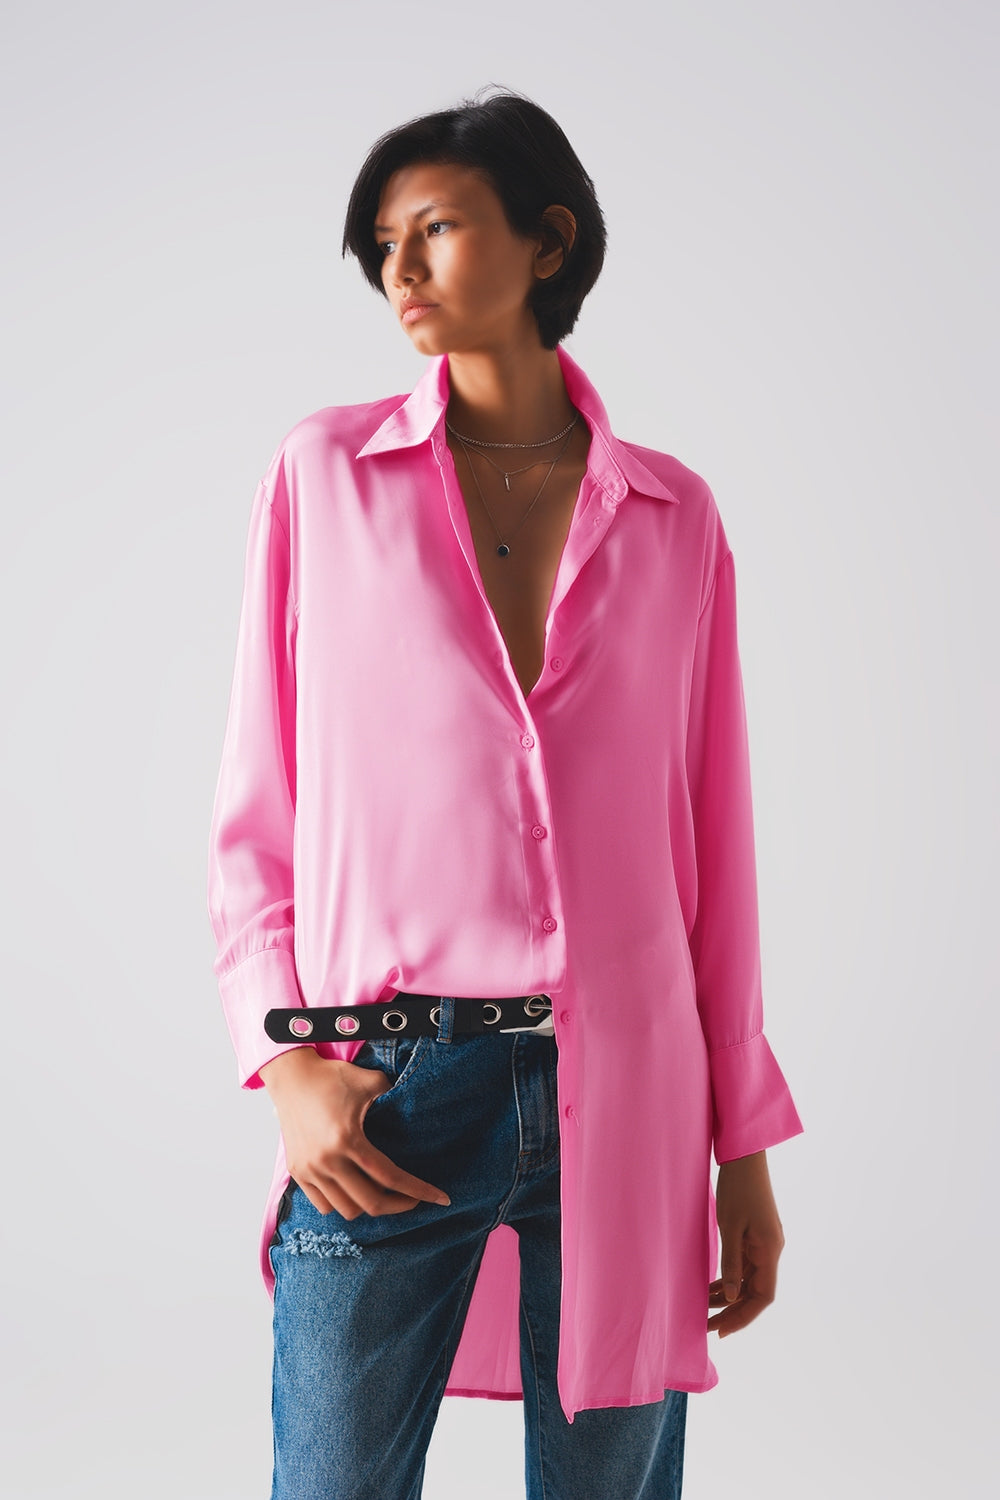 Q2 Long sleeve satin button front shirt in pink